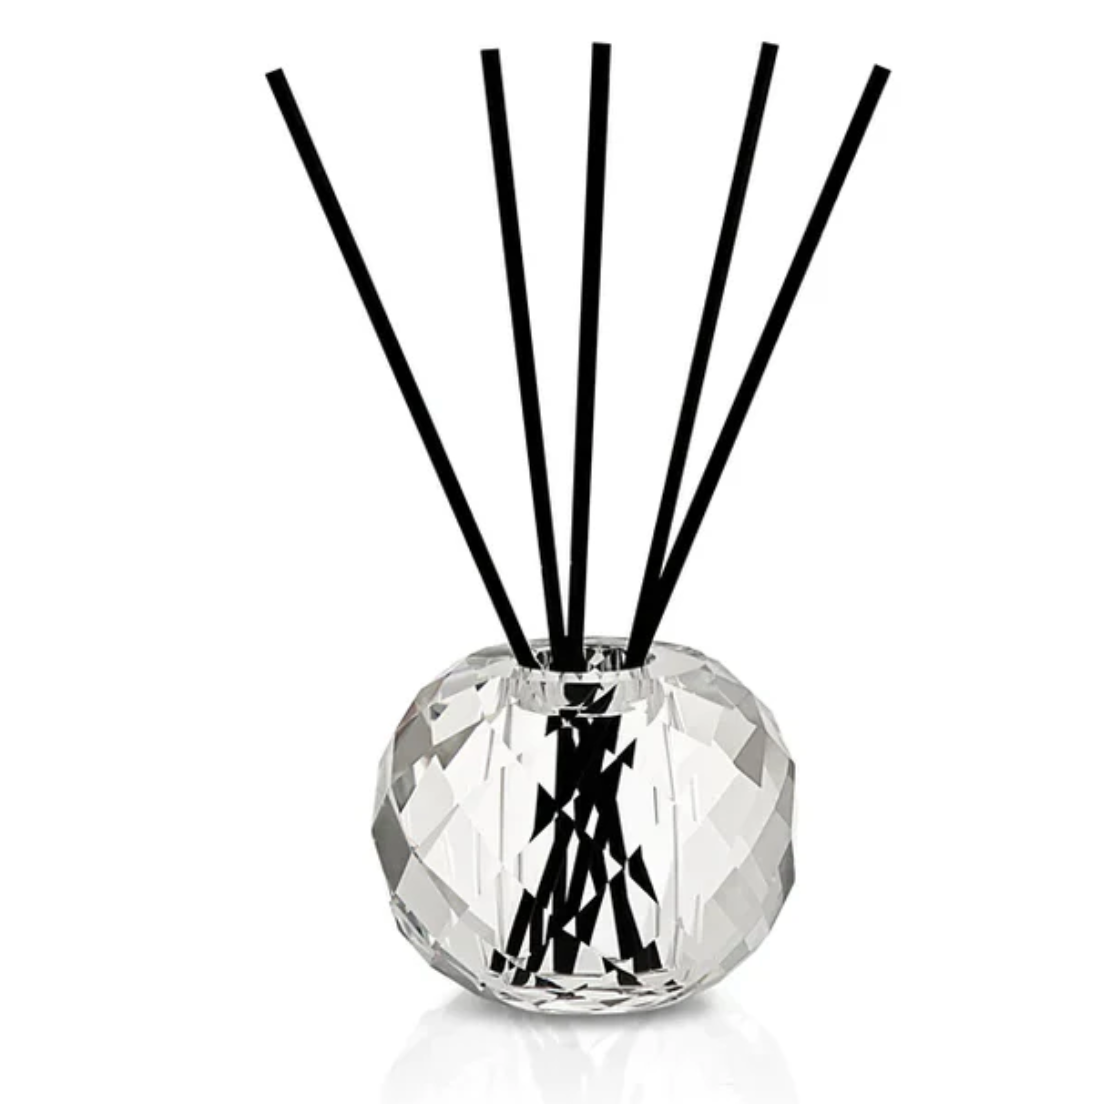 Crystallo Orb Reed Diffuser – 4oz. – Whispering Waves